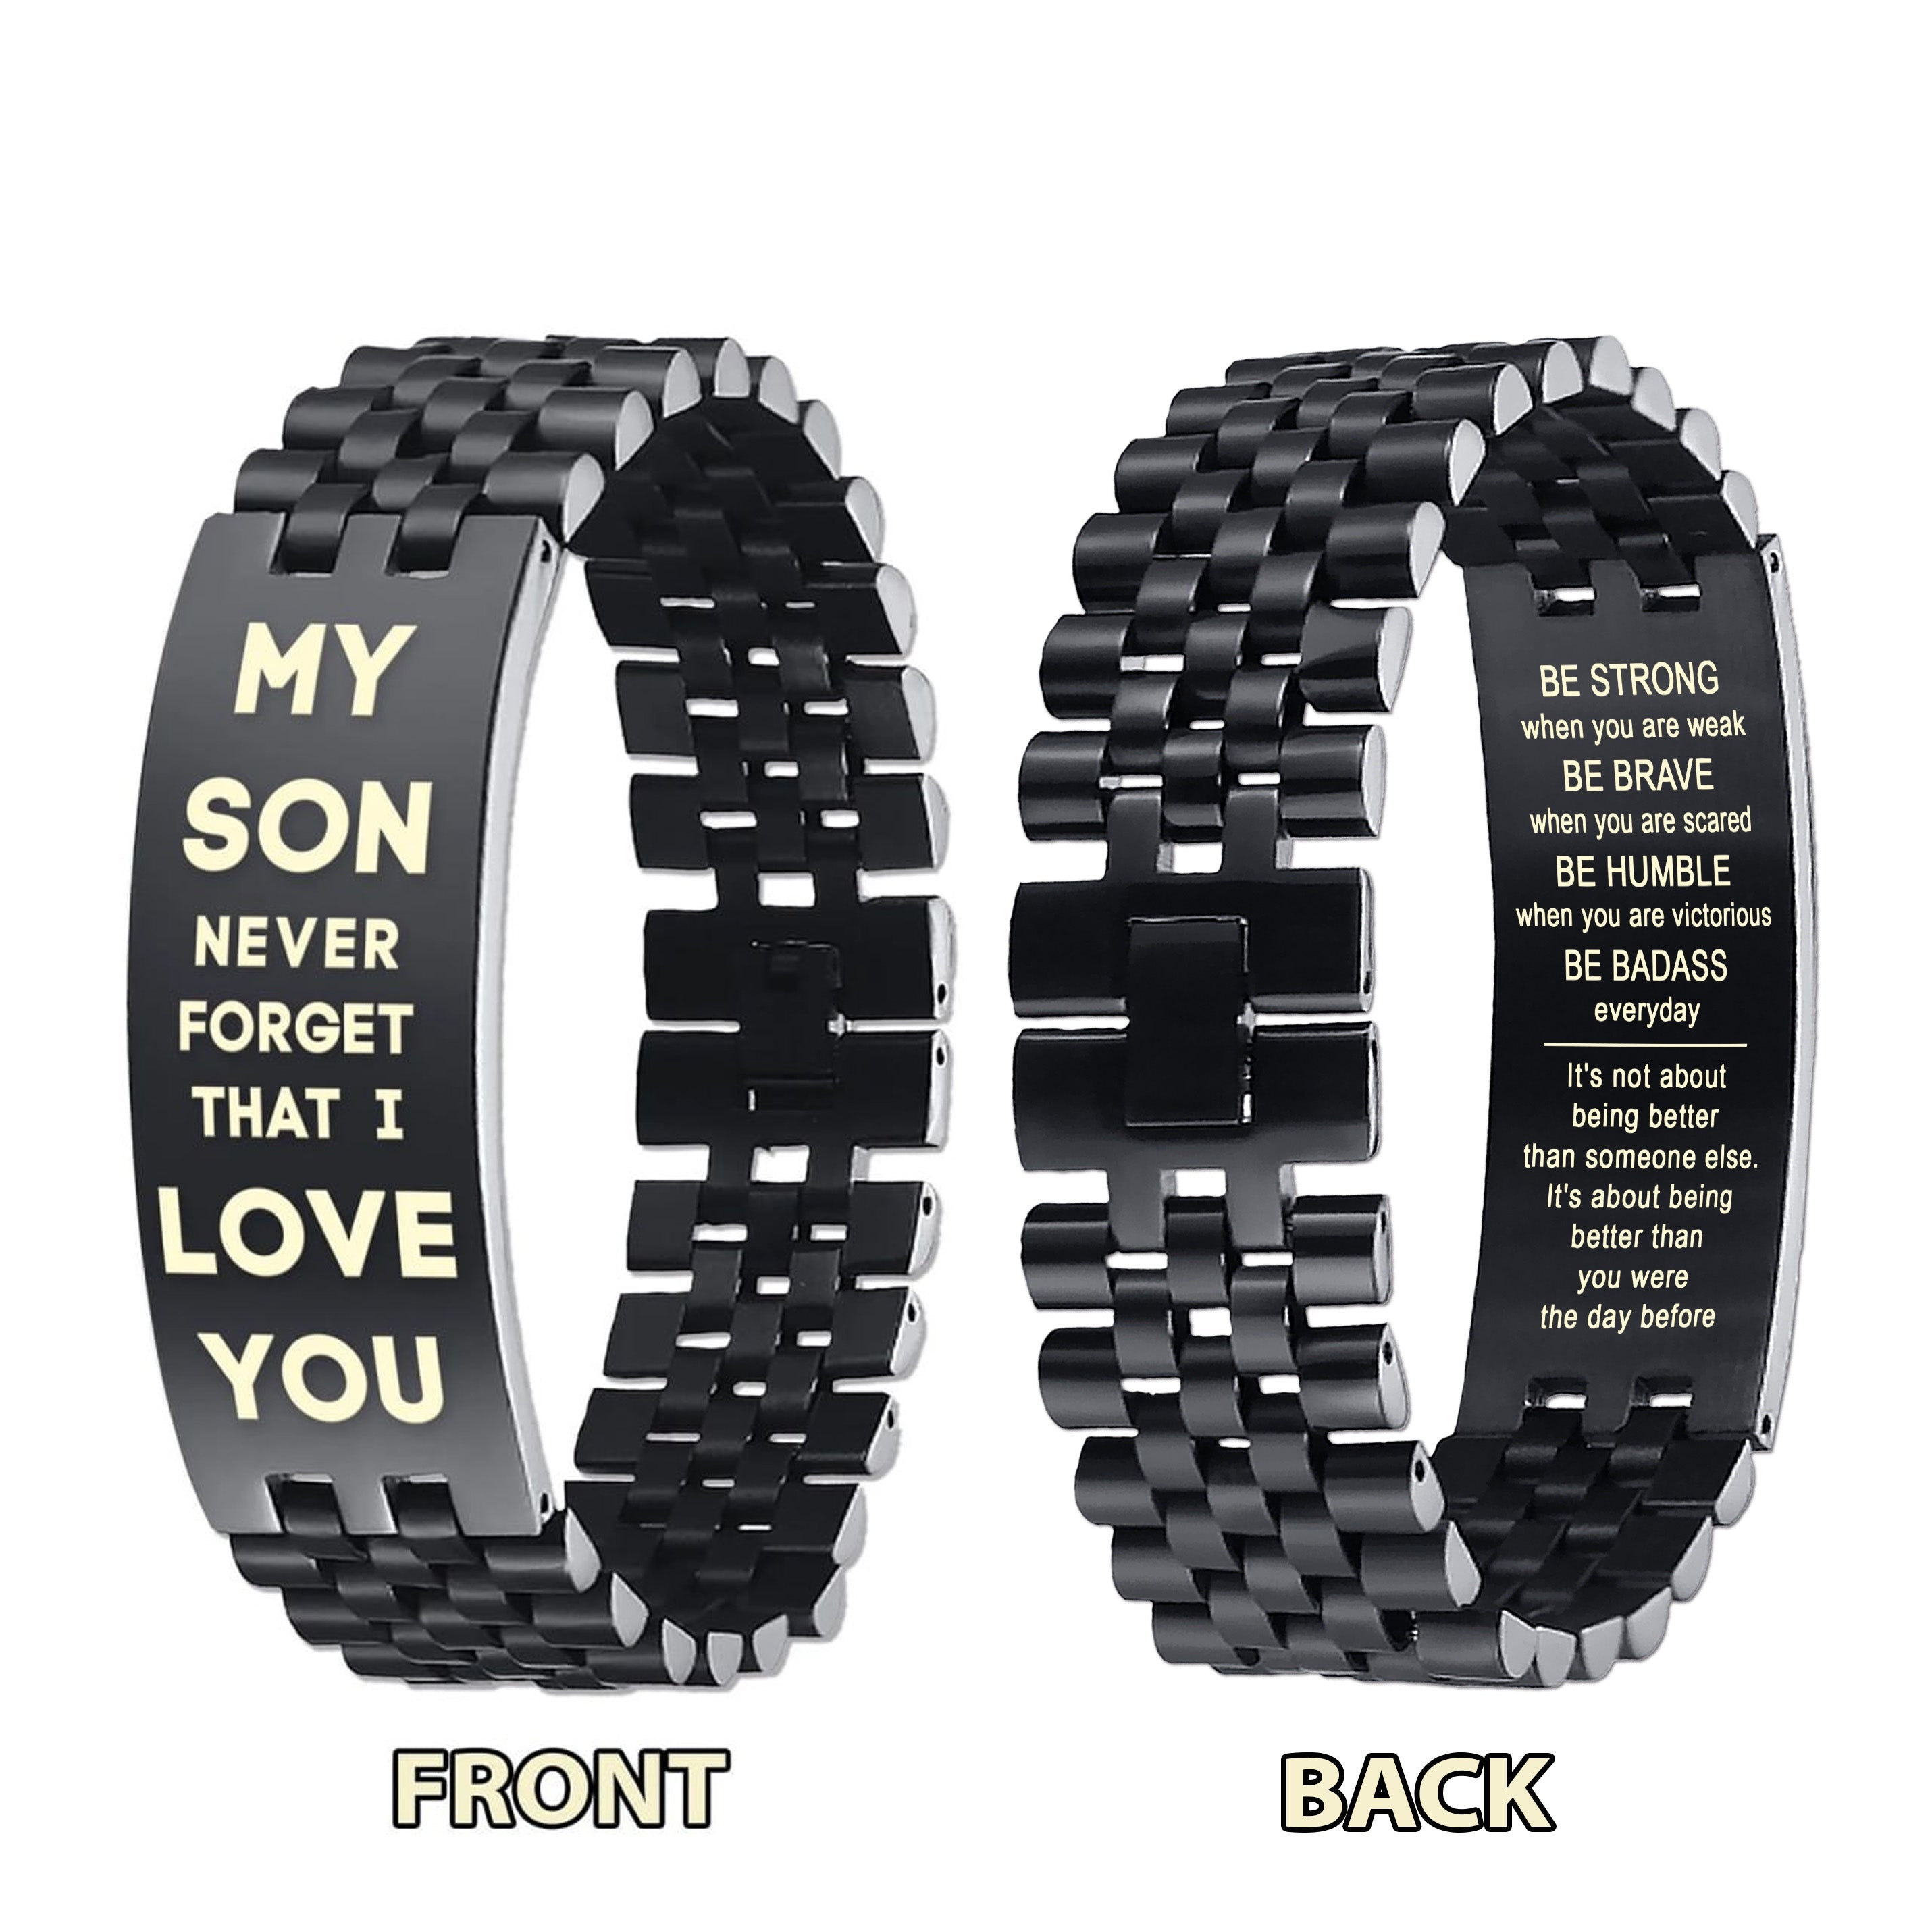 Family Bracelet Double Sided My Son Never Forget That I Love You, Never Lose